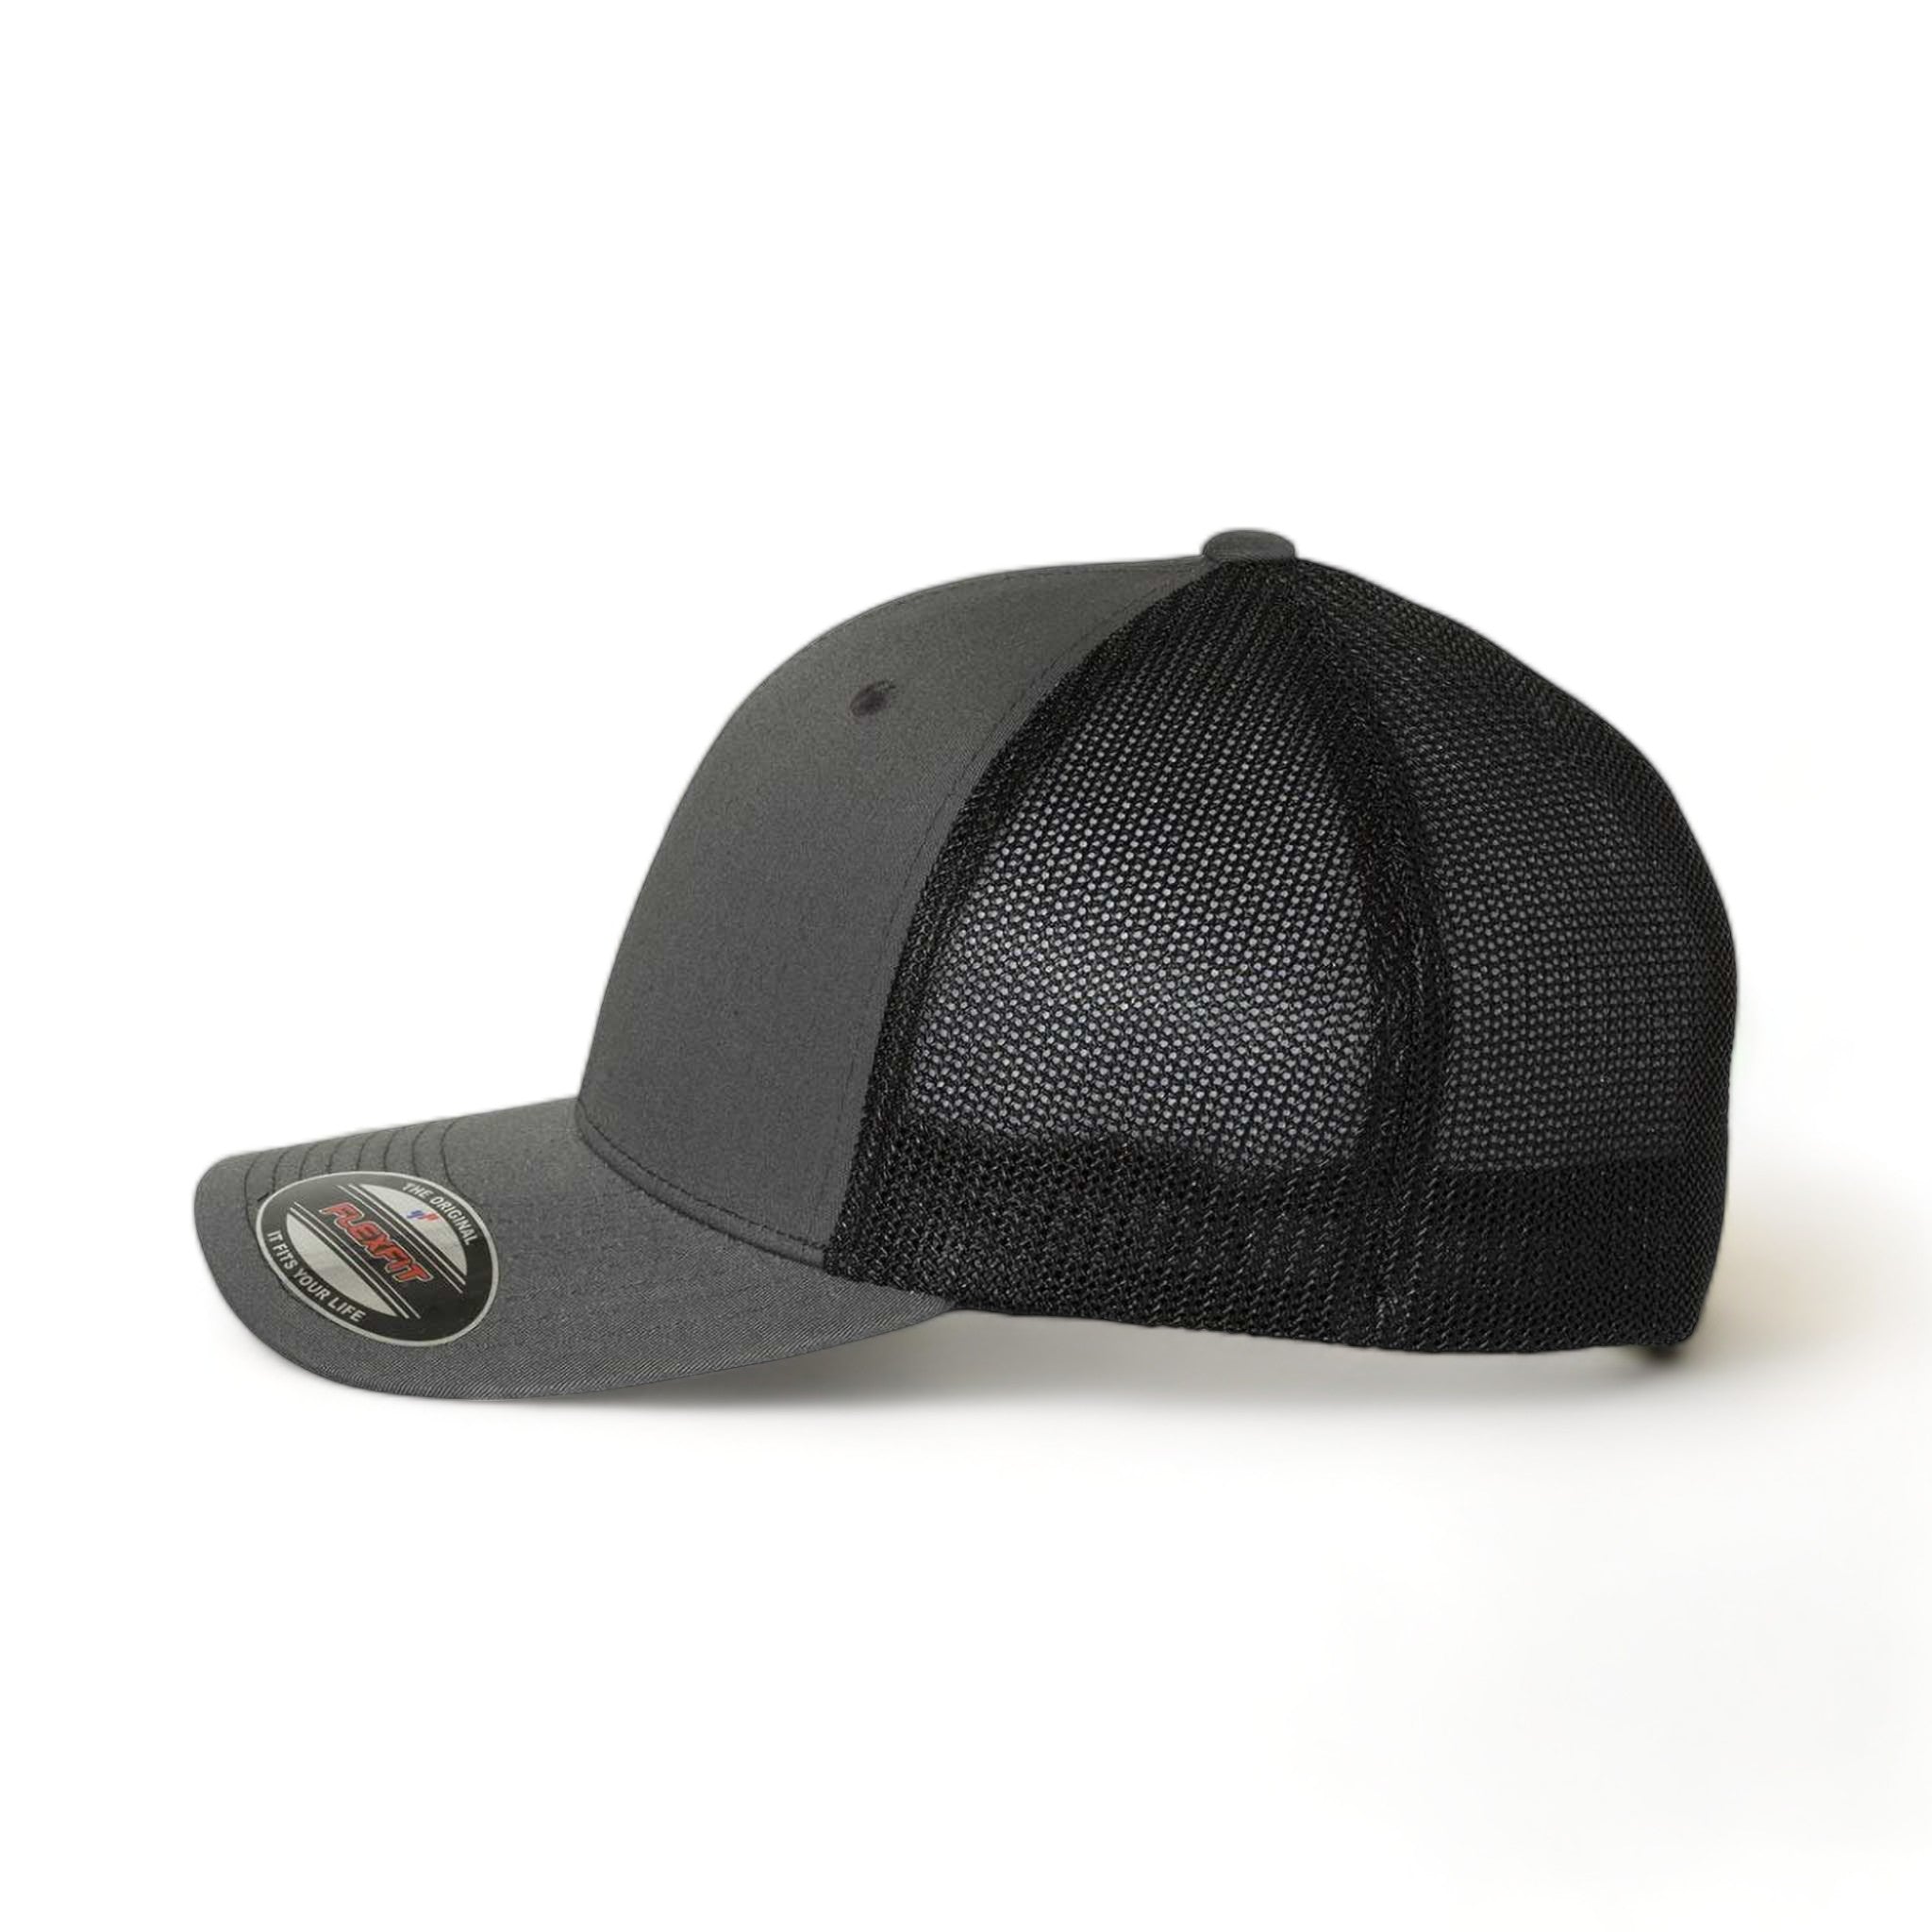 Side view of Flexfit 6511 custom hat in charcoal and black